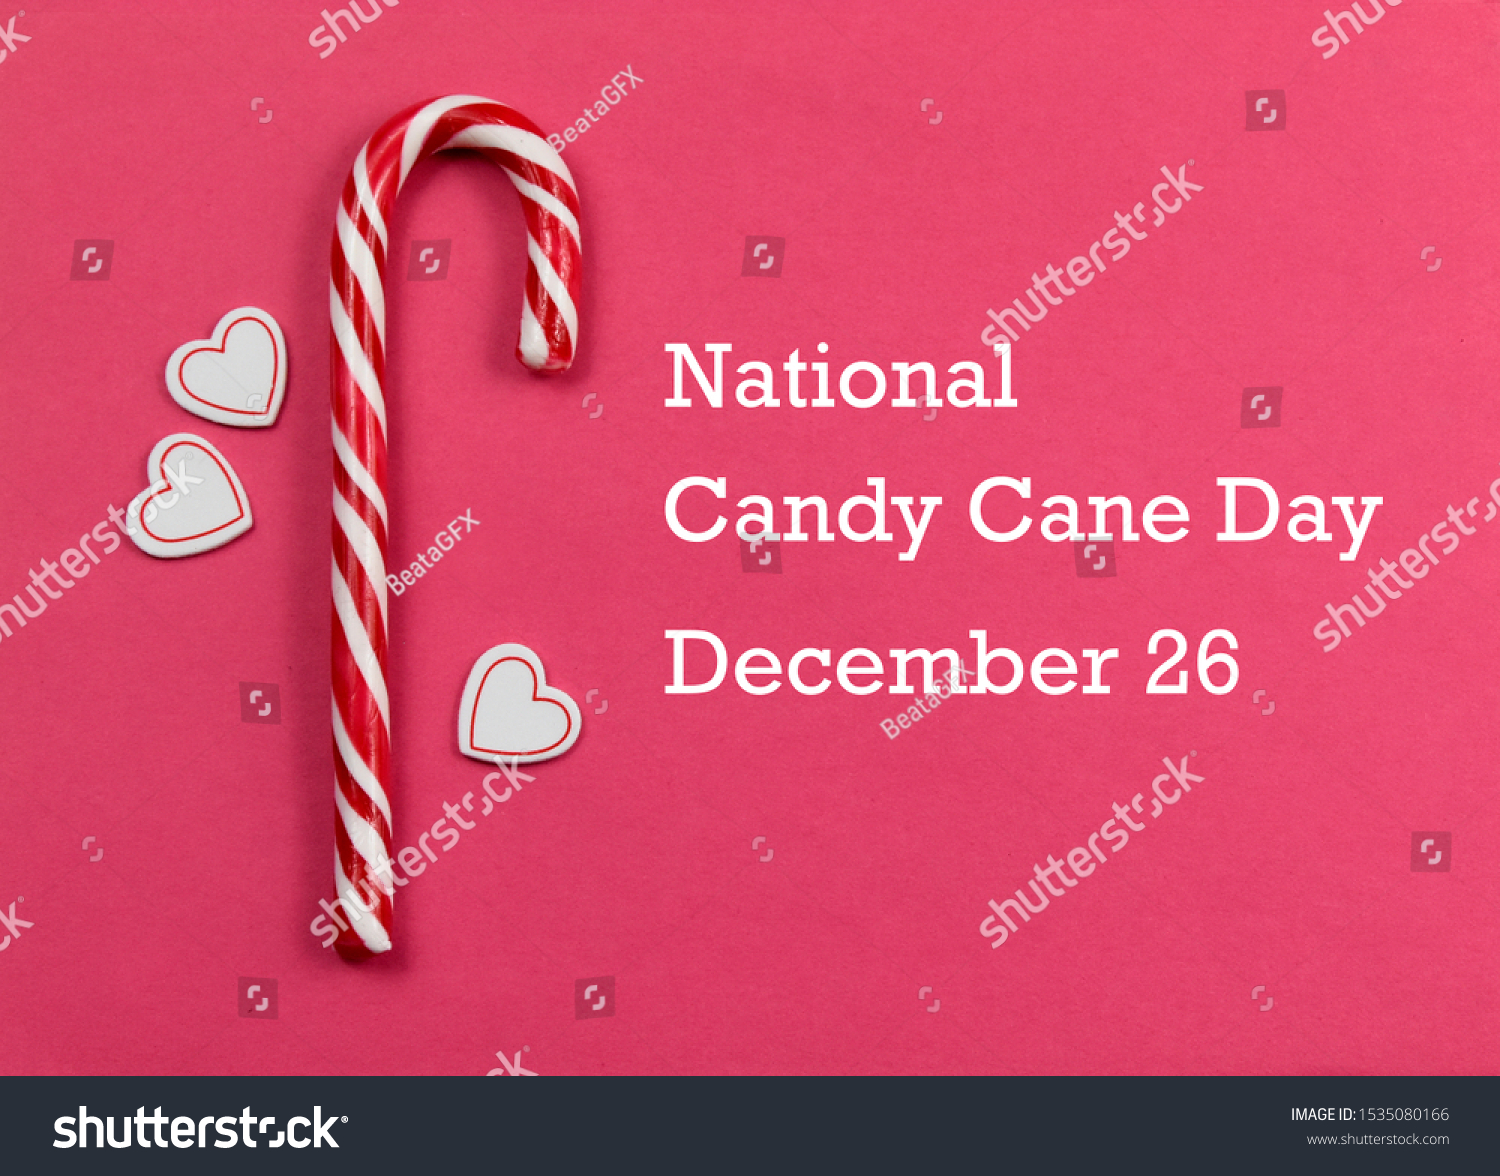 National Candy Cane Day images. Candy Cane with hearts on a pink background. Candy Cane Day Poster, December 26. Christmas candy cane stock images. Sweet Christmas symbol #1535080166